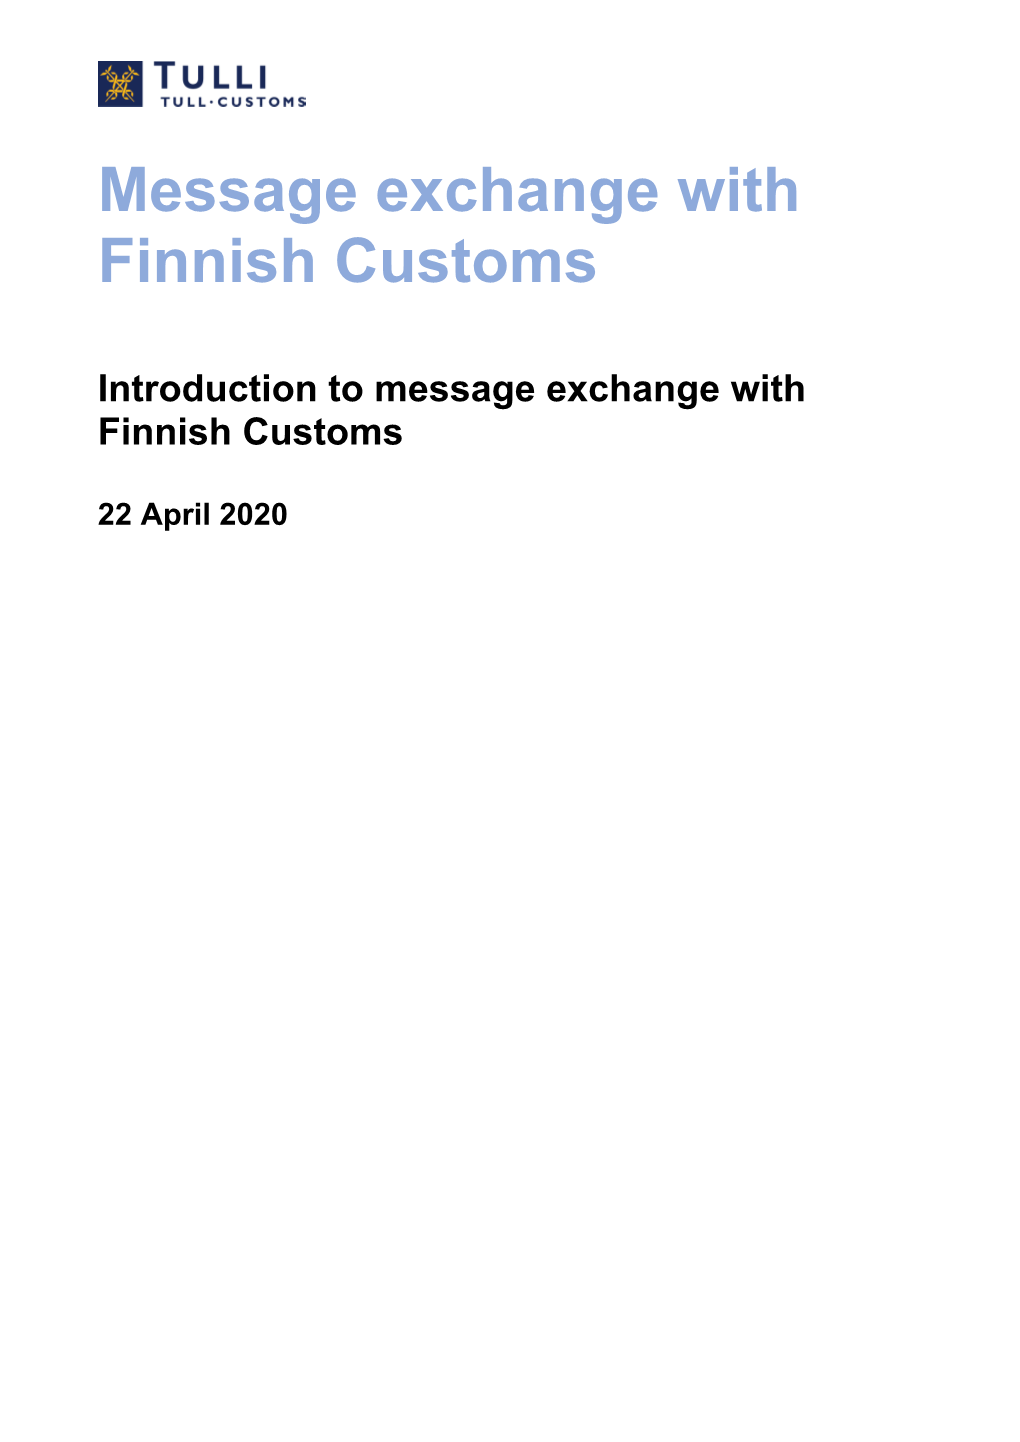 Message Exchange with Finnish Customs